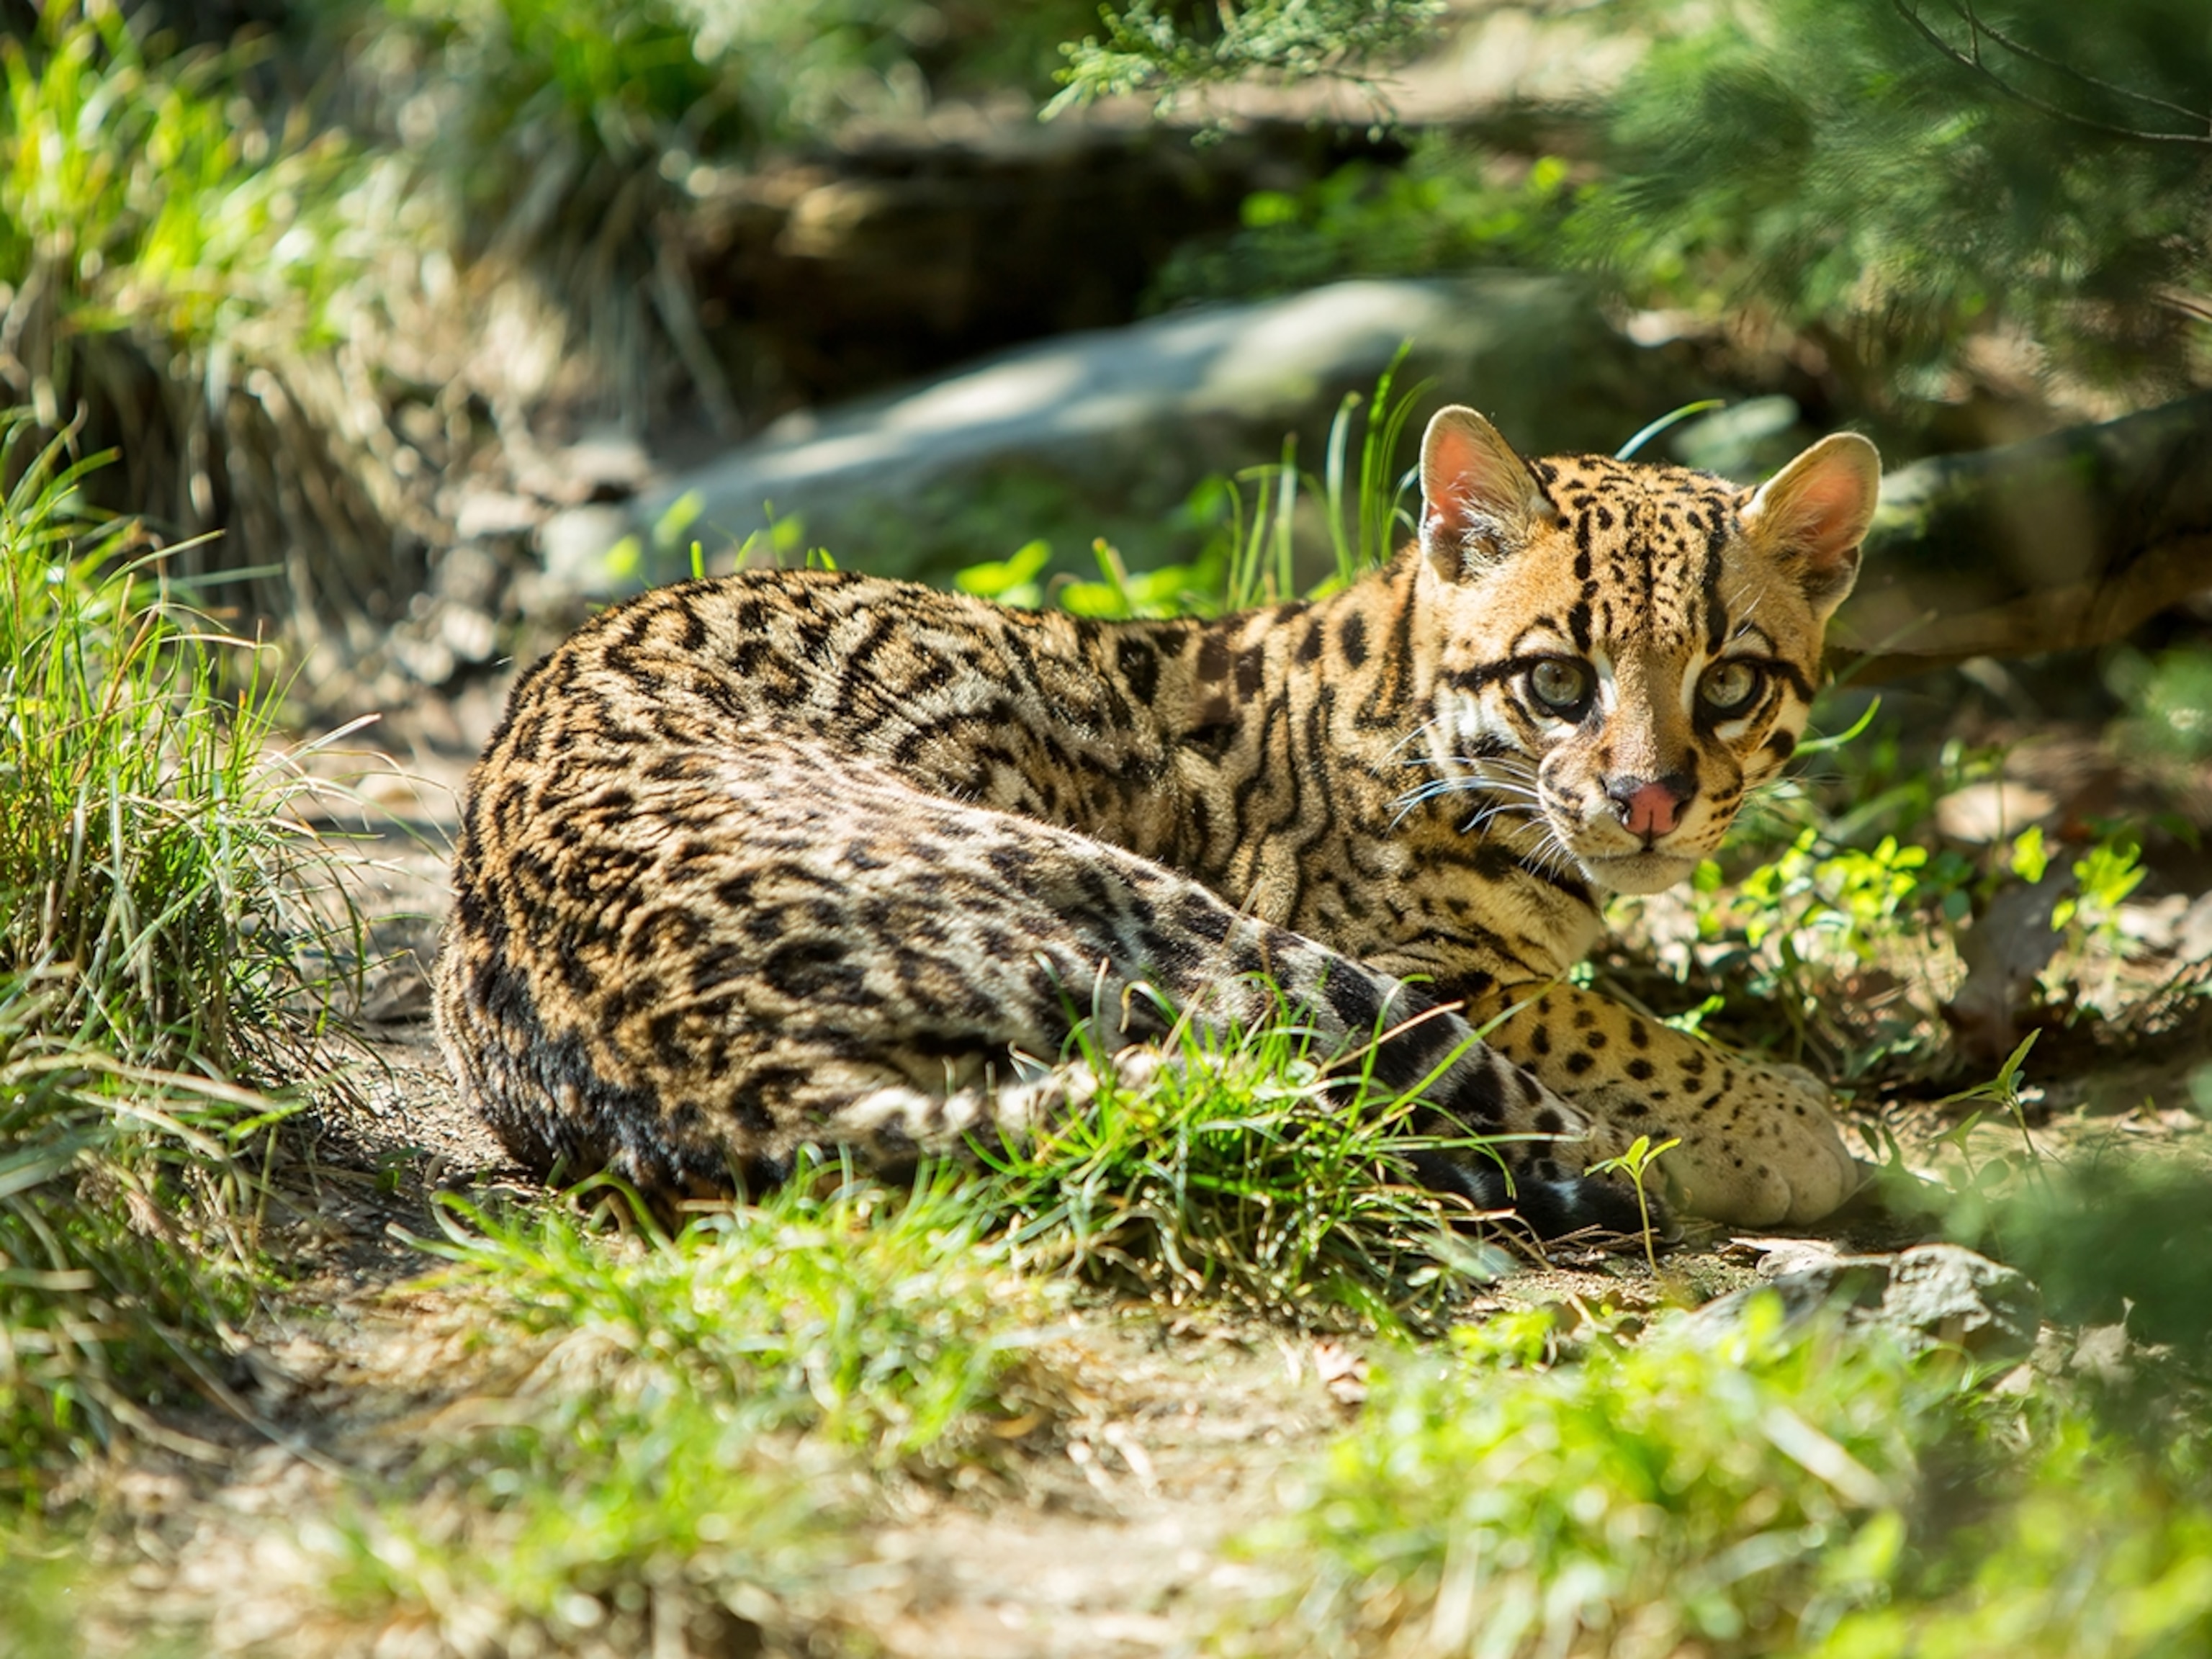 Which type of habitat does the ocelot live in?